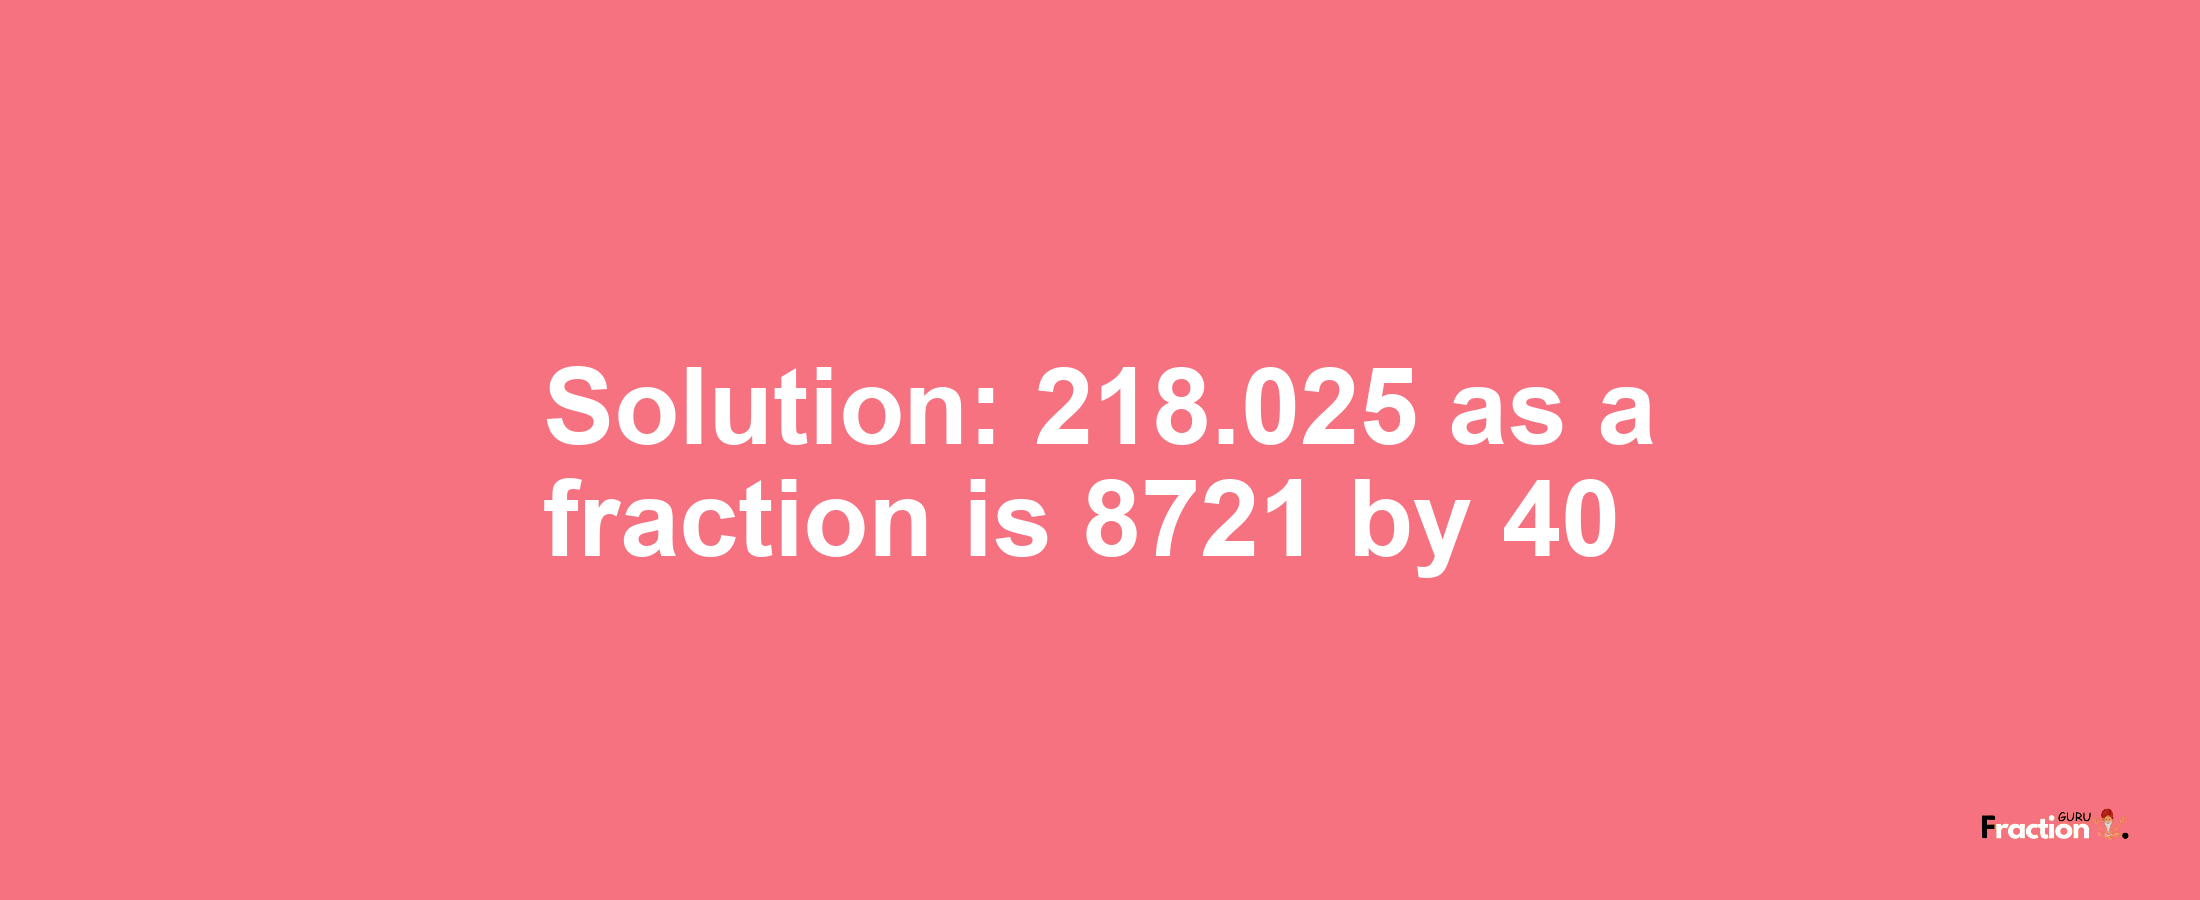 Solution:218.025 as a fraction is 8721/40